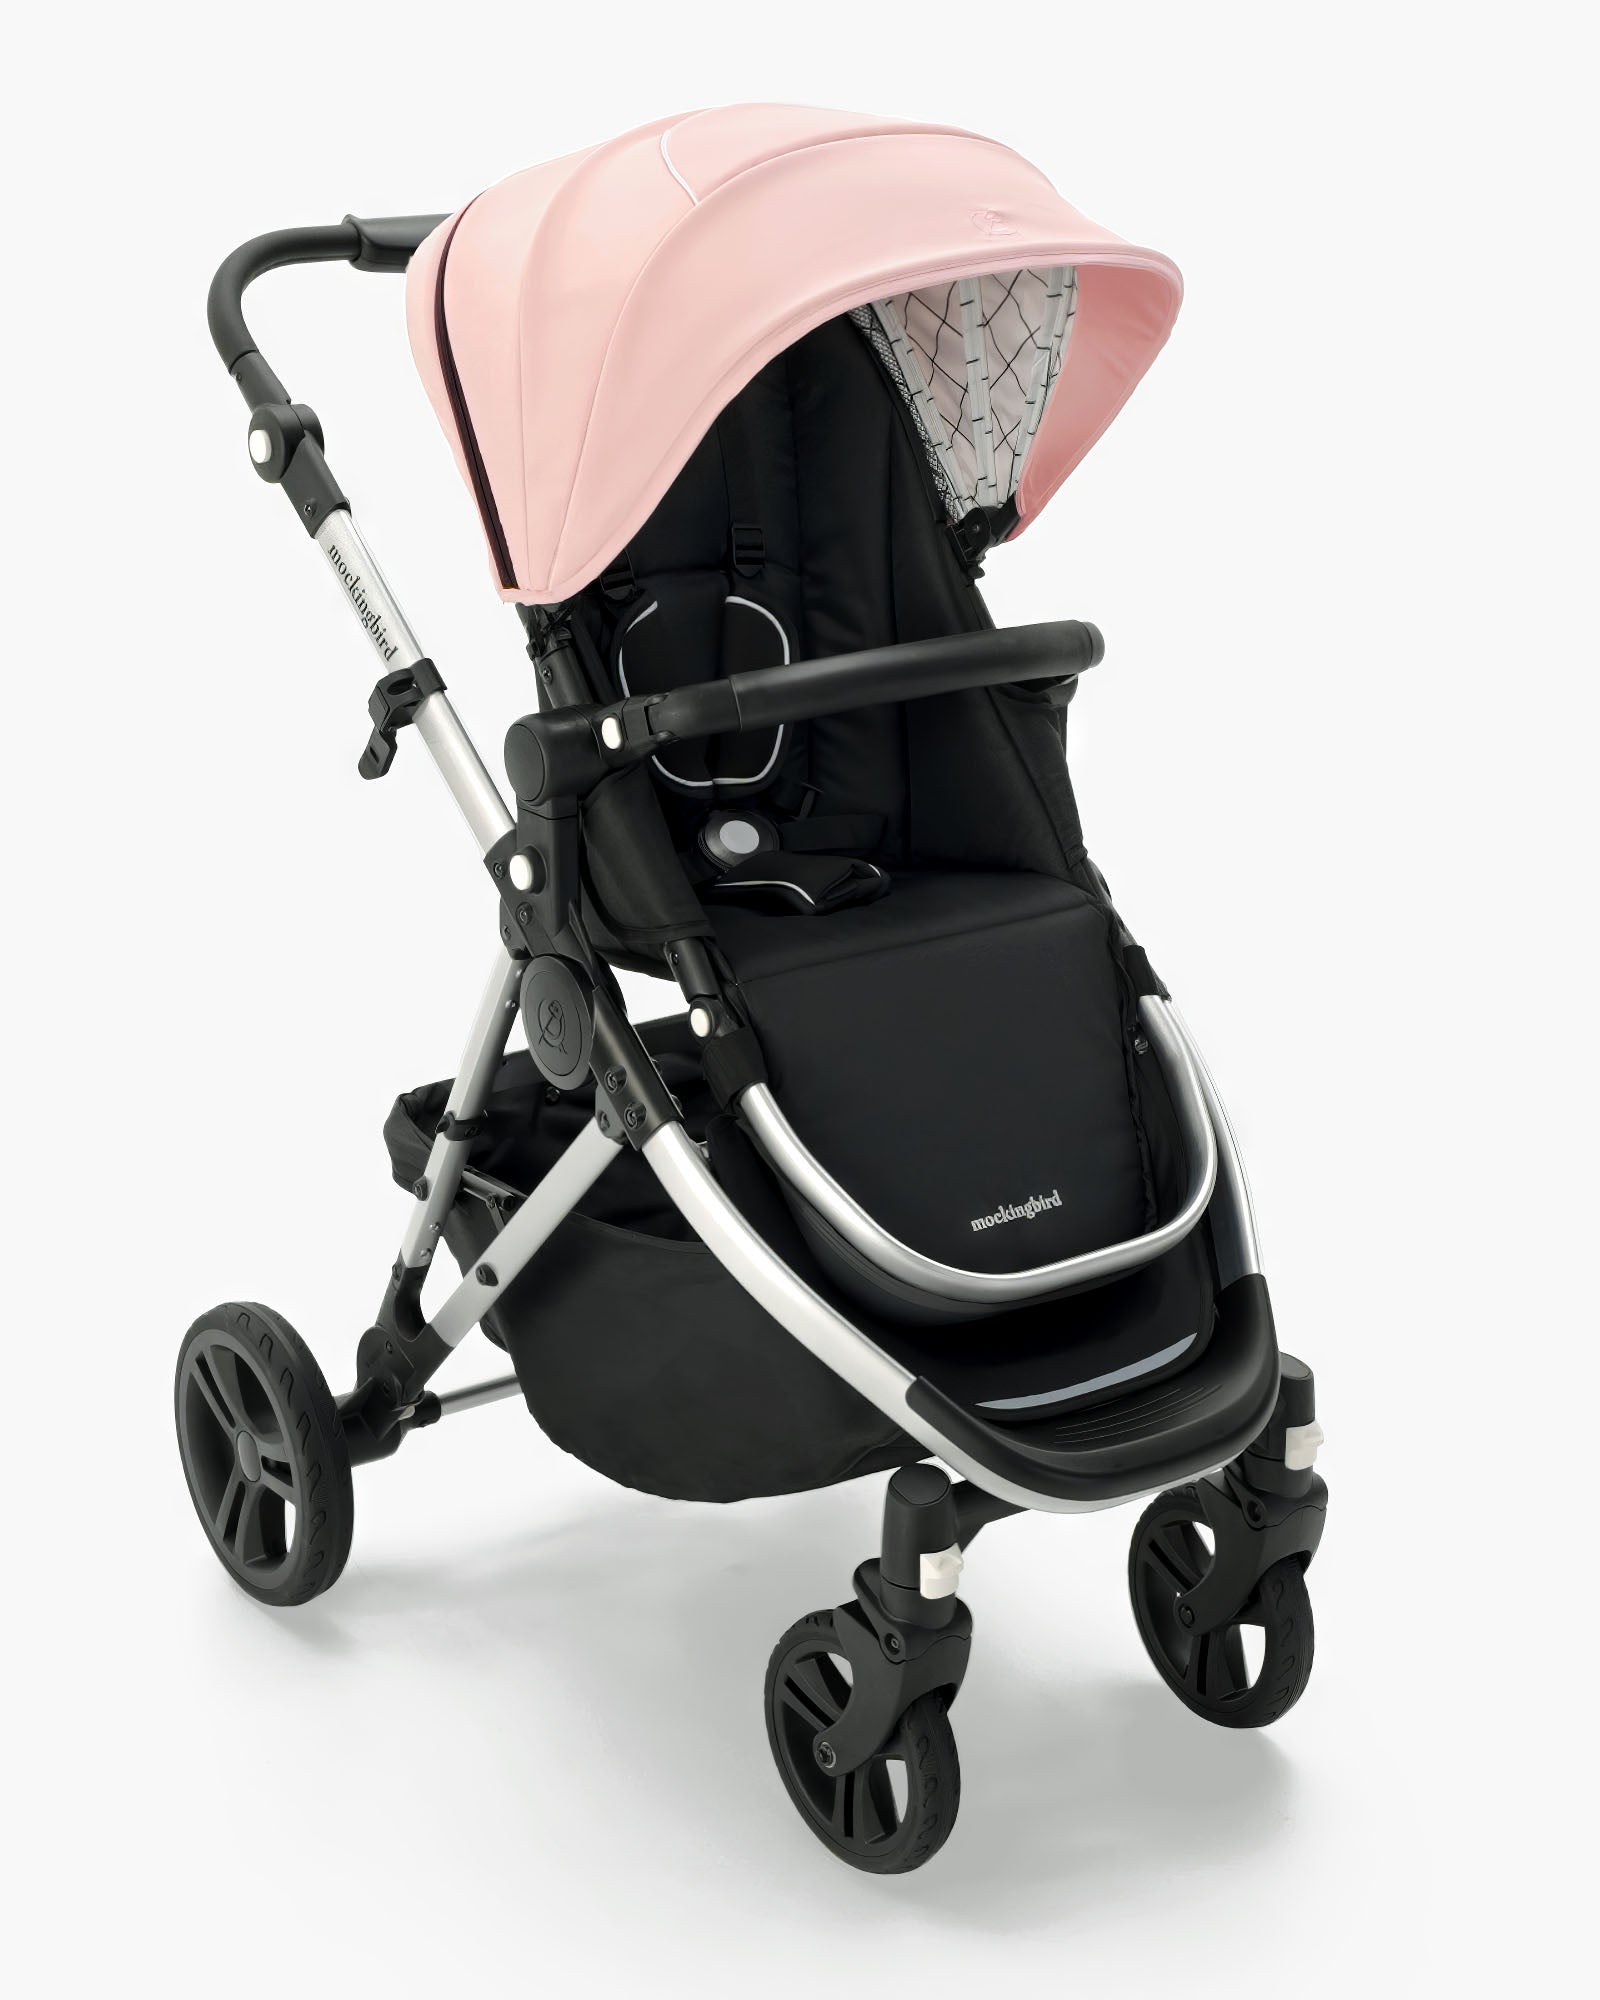 A modern black Mockingbird Single Stroller 2.0 baby stroller with a pink canopy, reclined seating area, and large wheels, isolated on a white background. #color_bloom